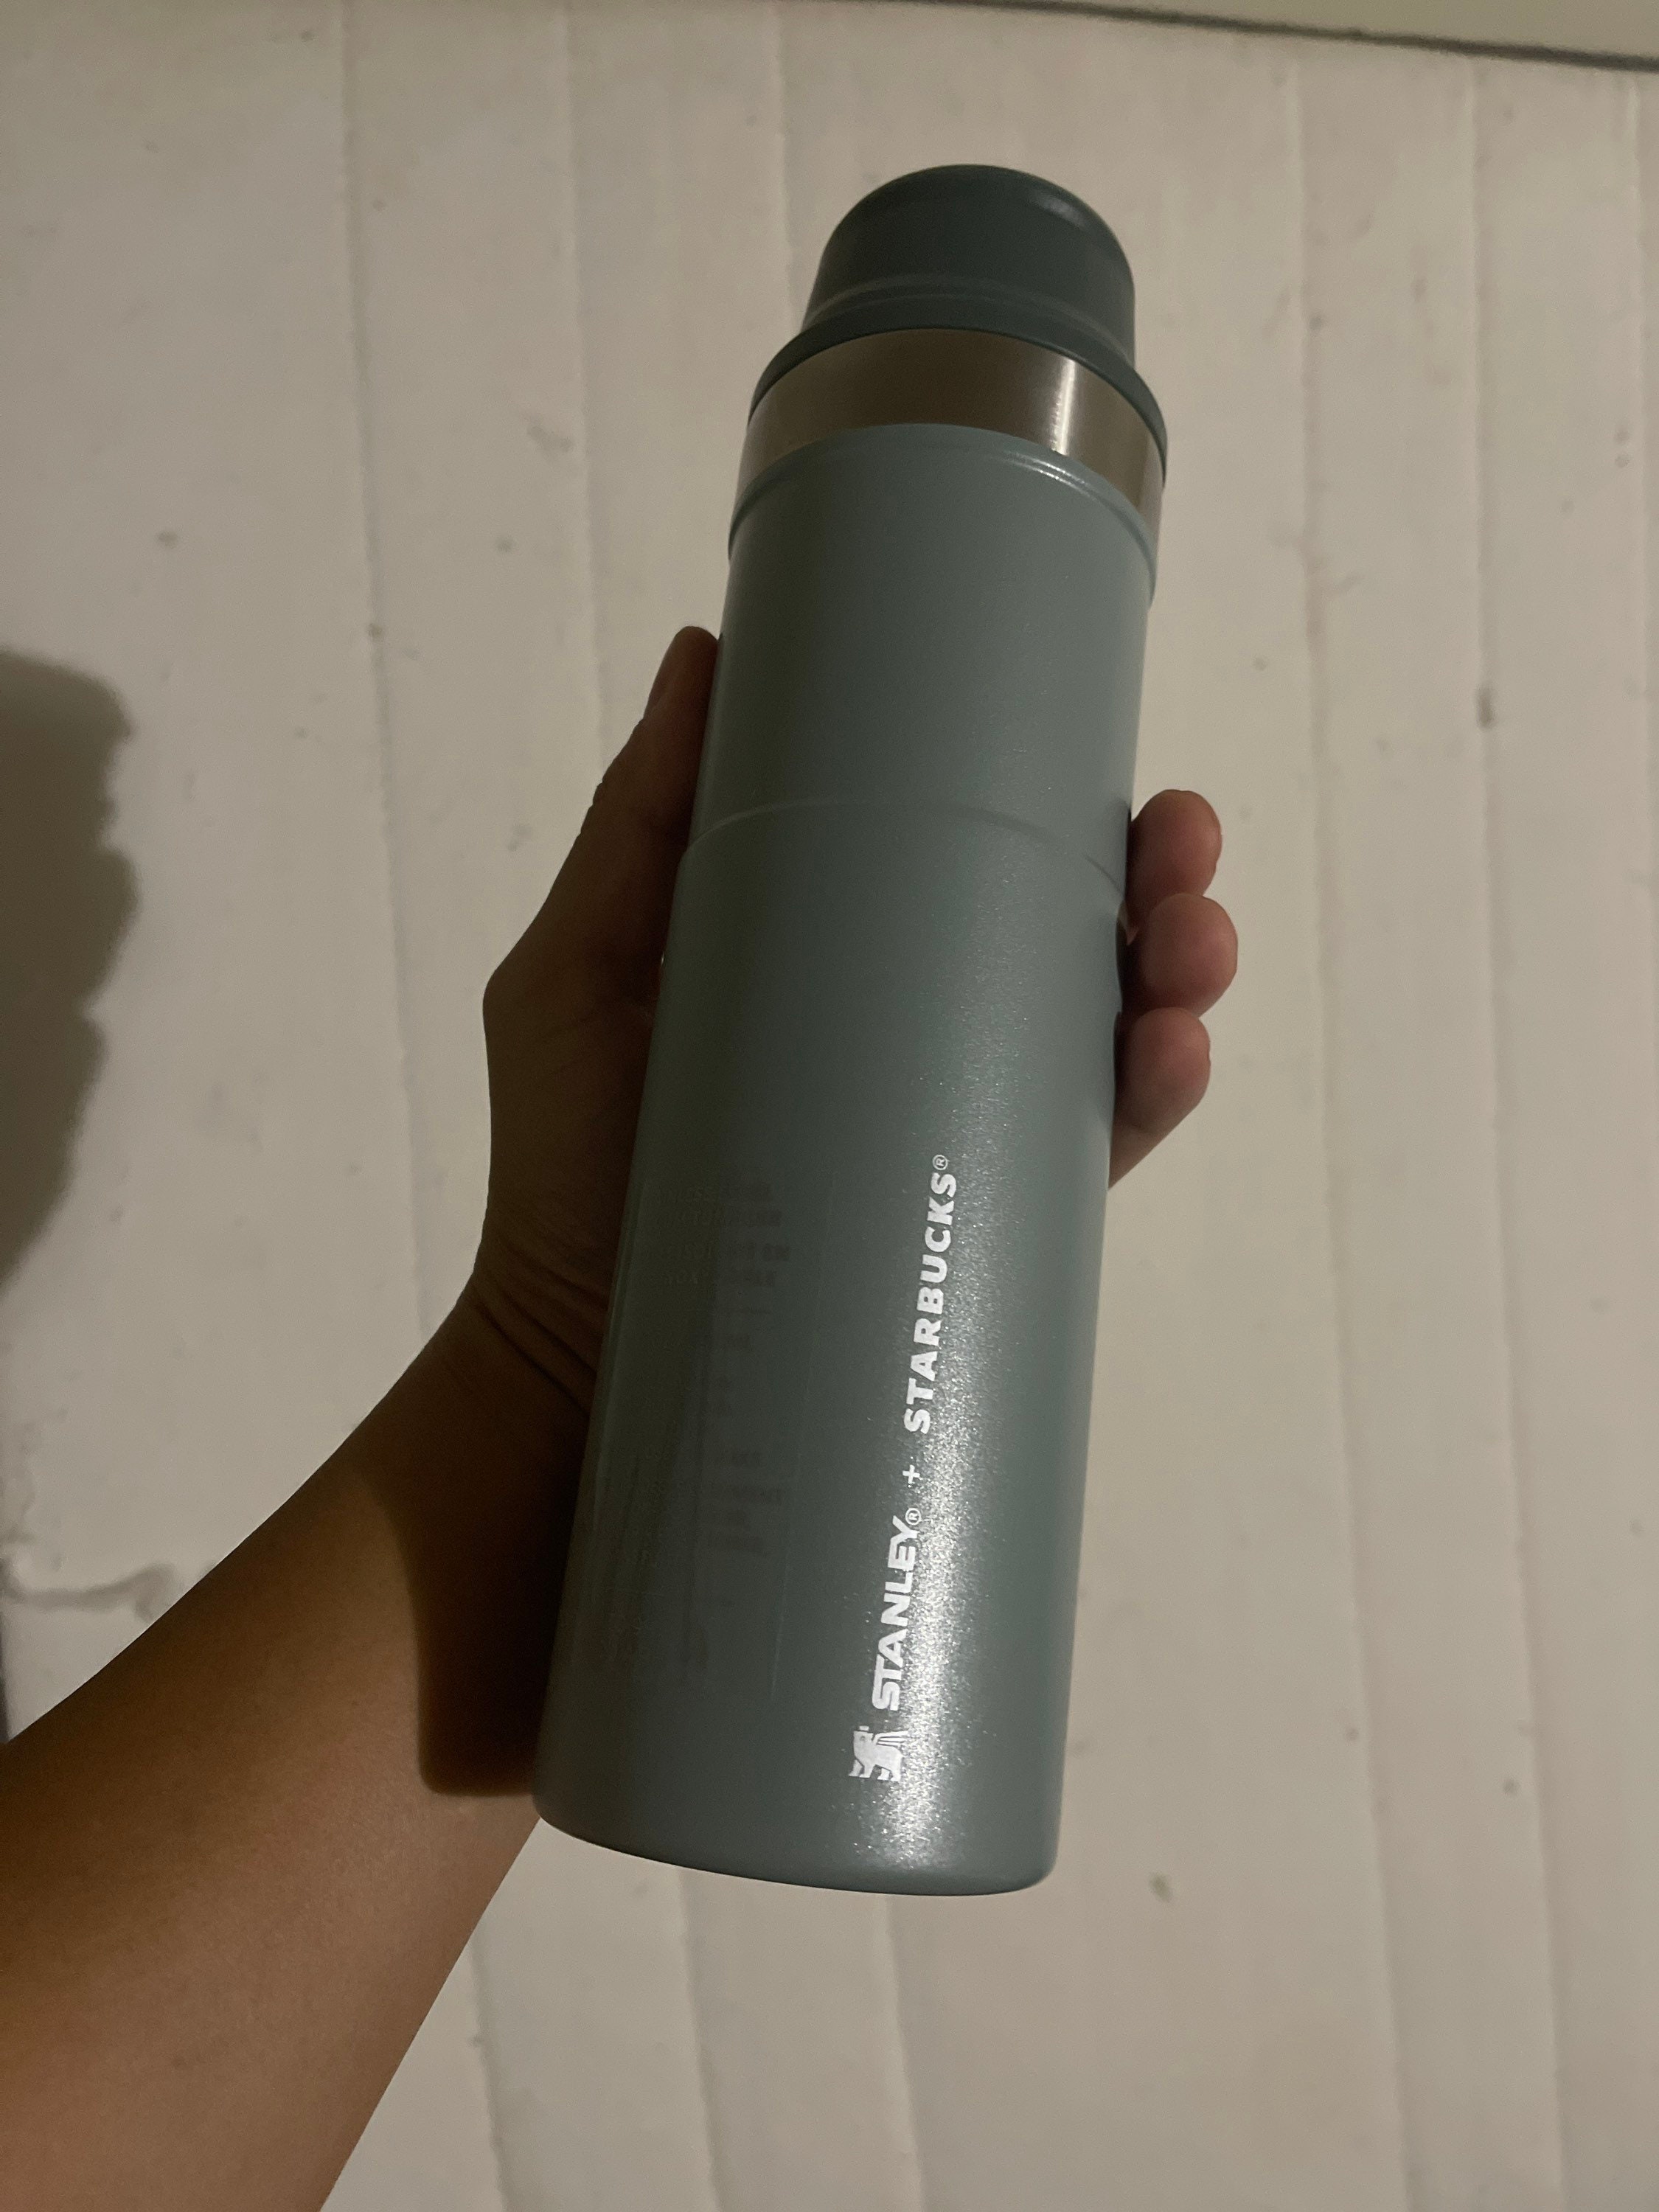 237ml/8oz Starbucks x Stanley Stainless Steel Green Grey Outdoor Camping  Portable Flask Bottle